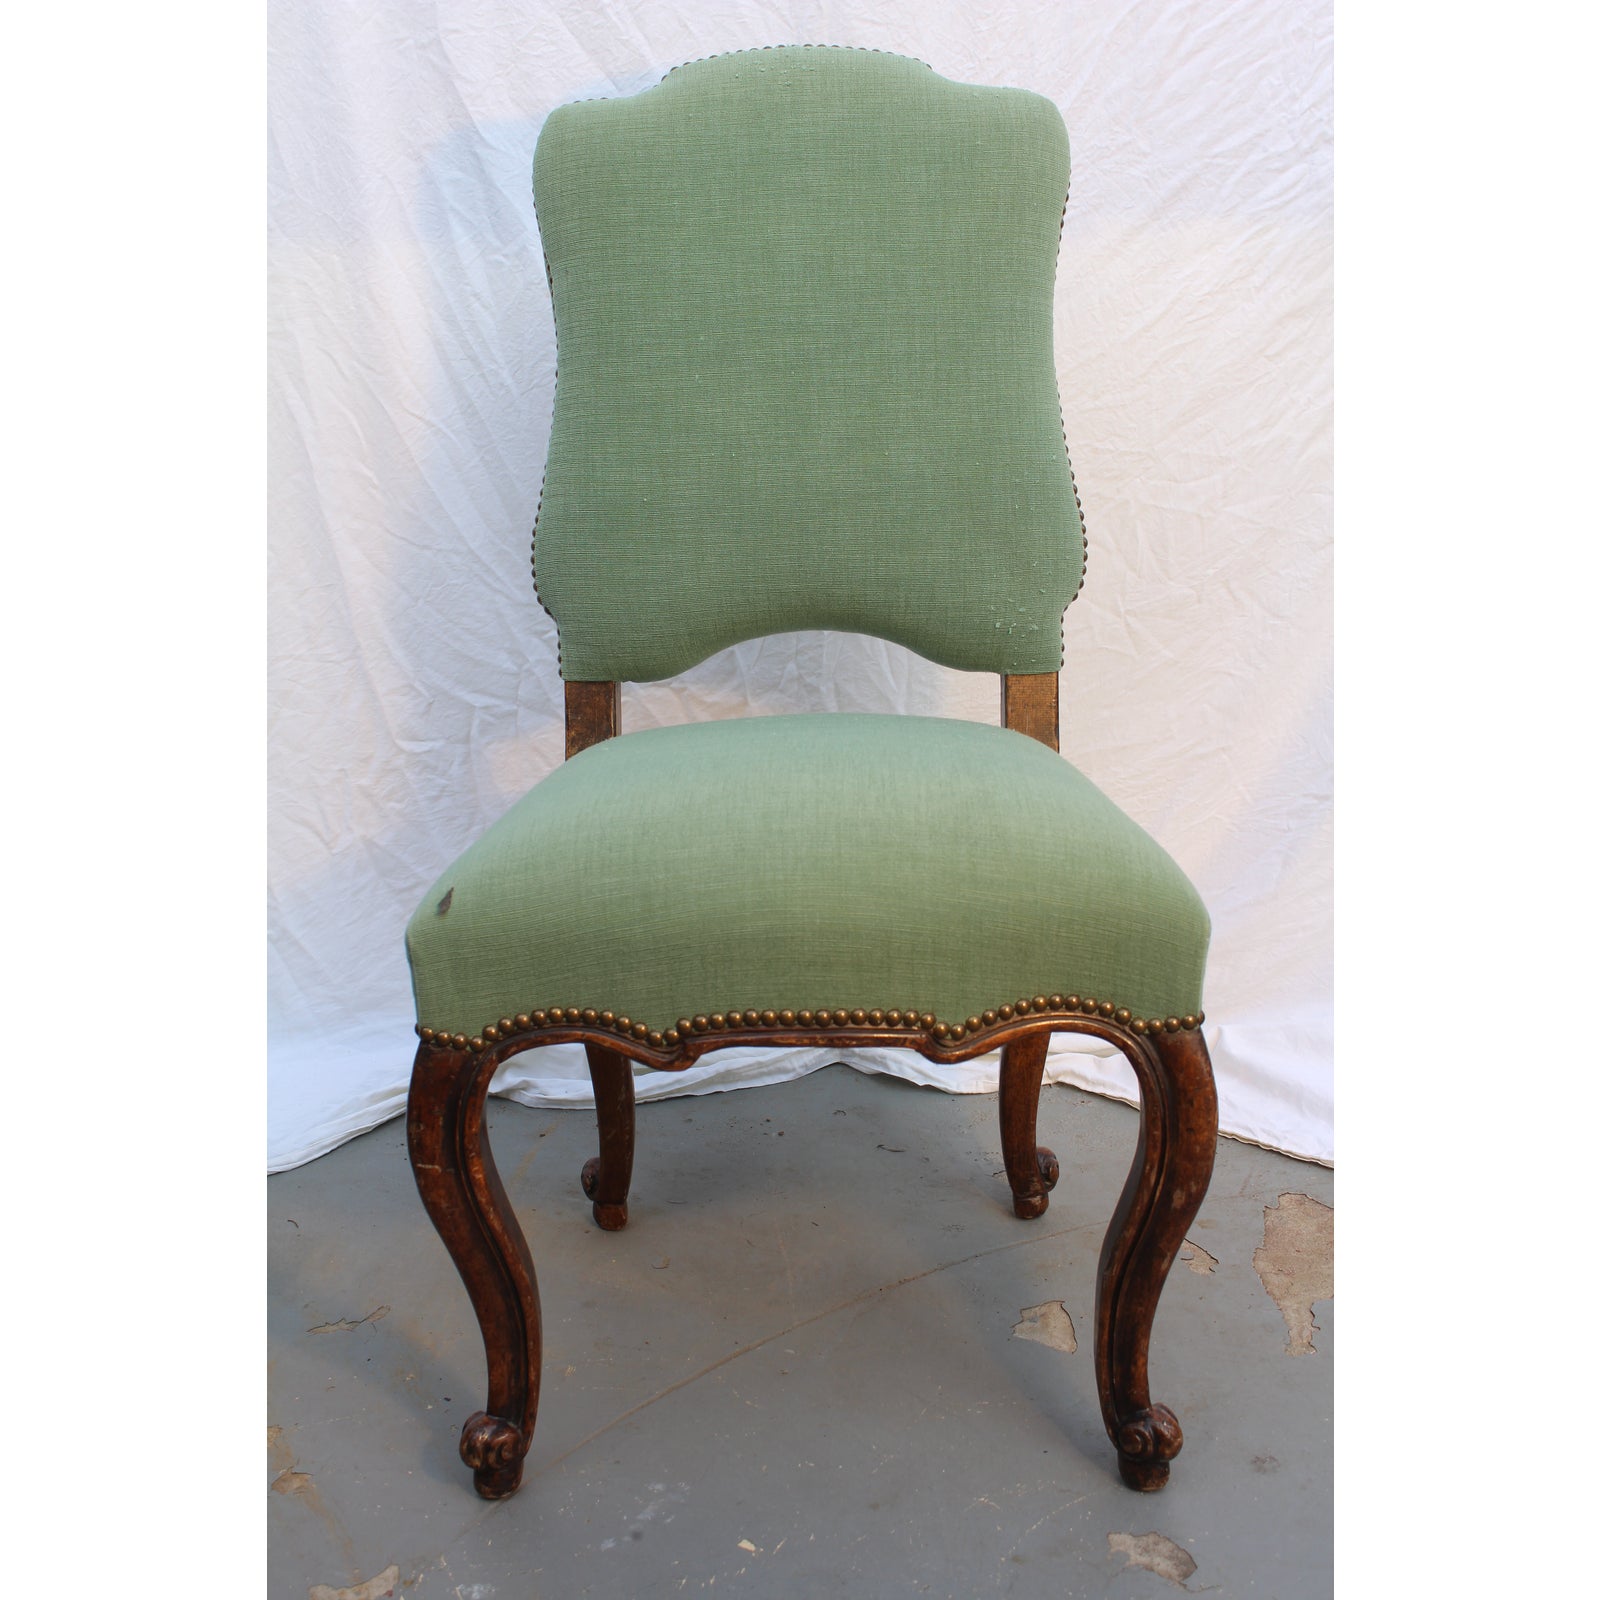 18th-c-louis-xv-french-provincial-green-upholstered-side-chair-6379